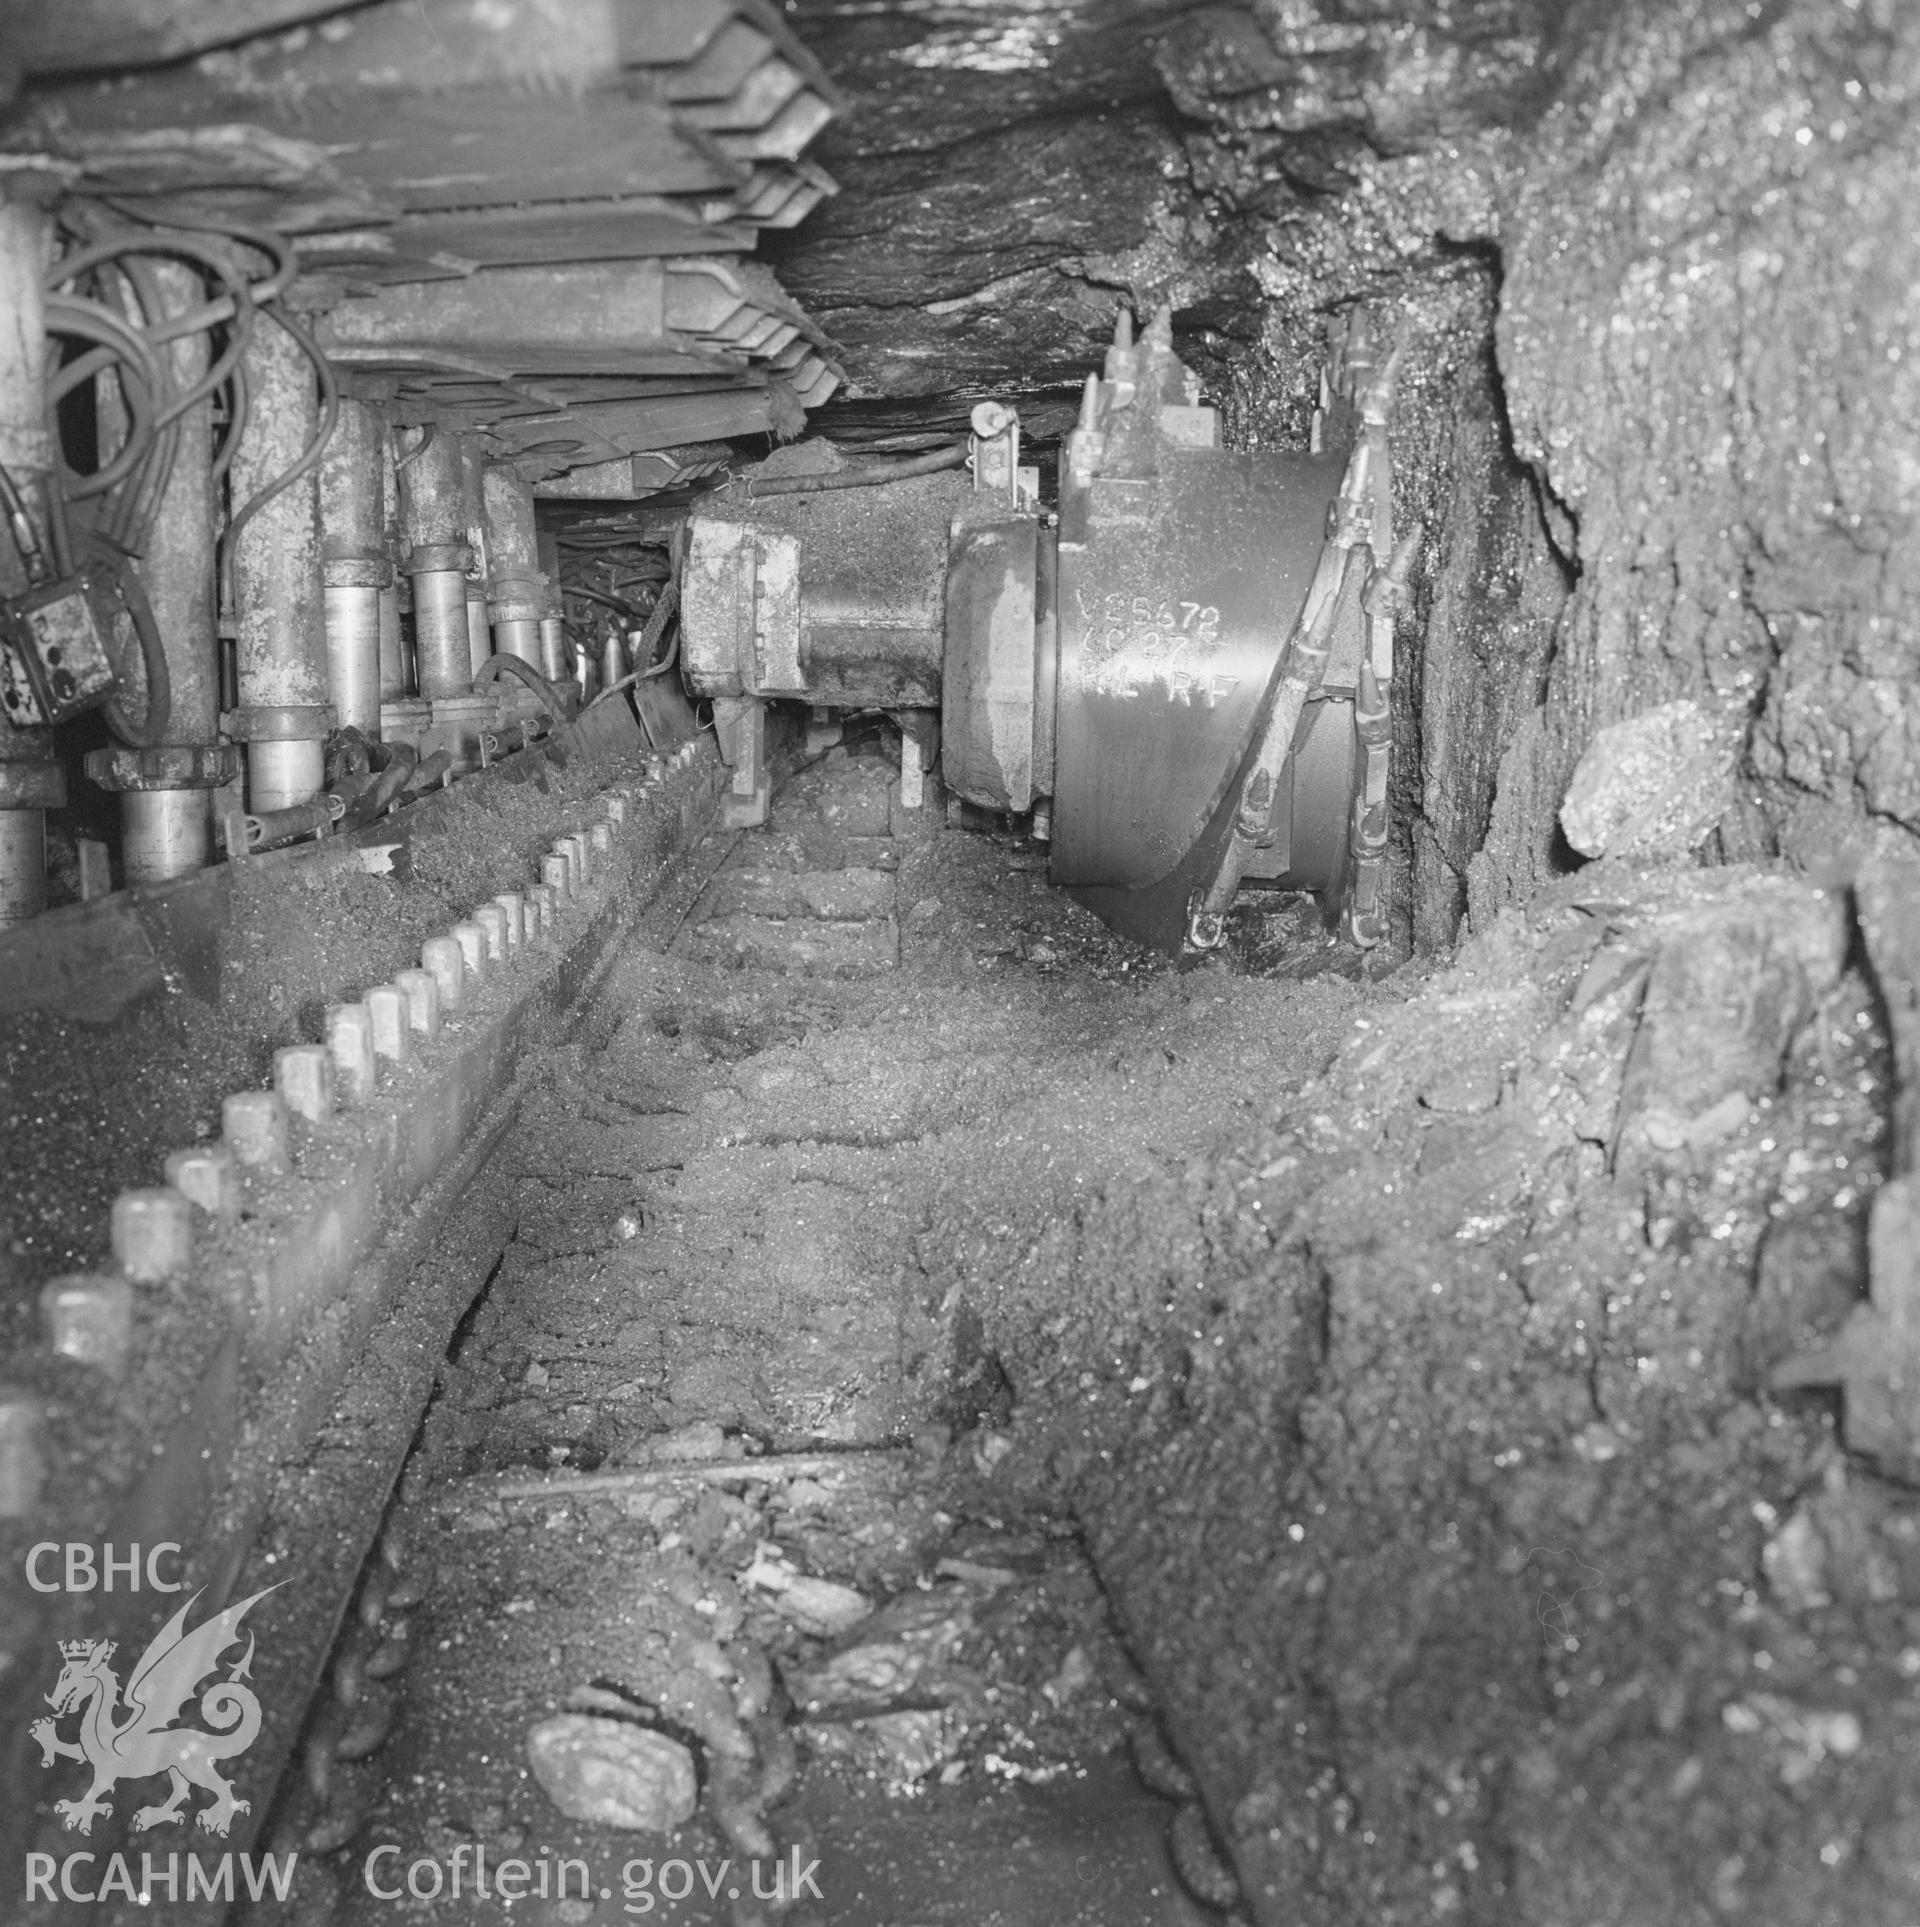 Digital copy of an acetate negative showing shearer on coal face at Blaenant Colliery, from the John Cornwell Collection.